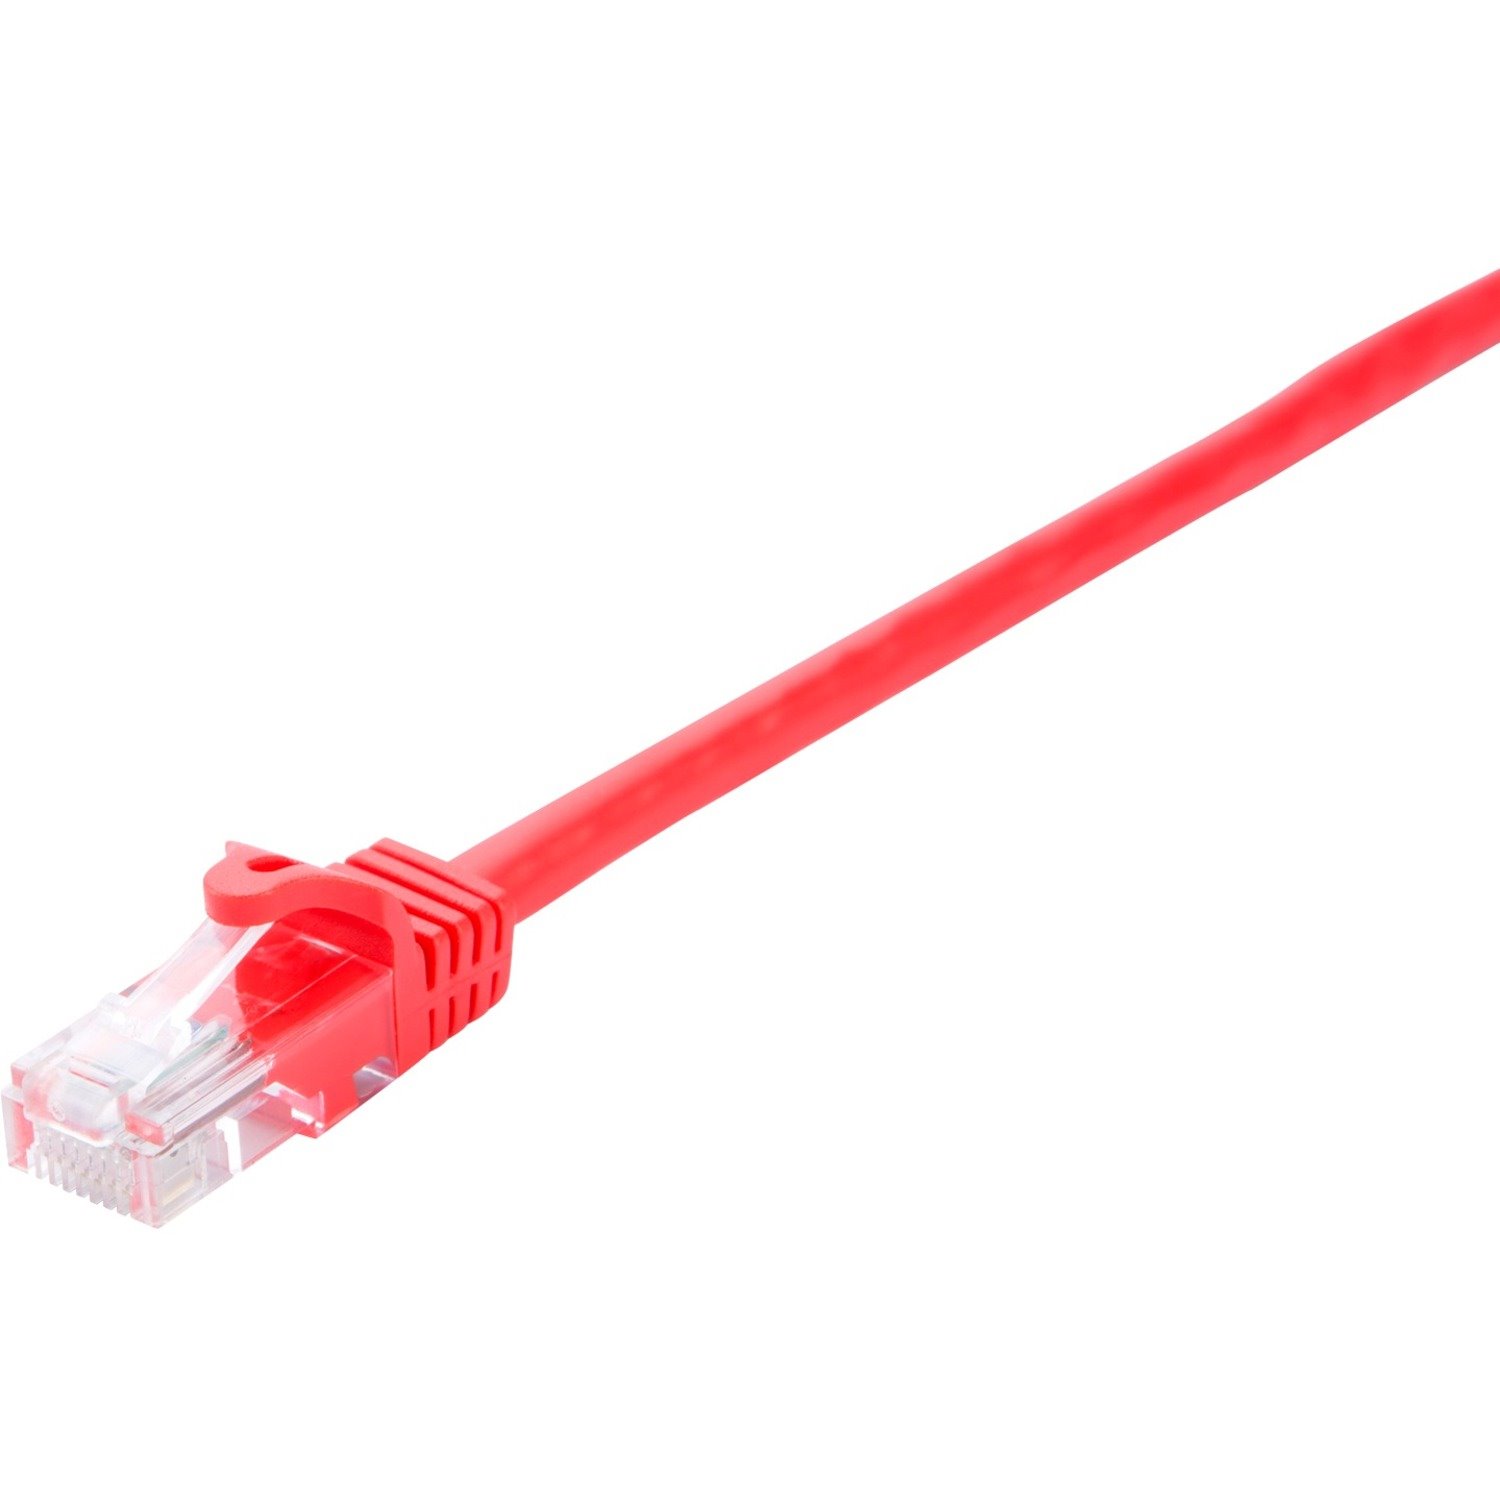 V7 Red Cat6 Unshielded (UTP) Cable RJ45 Male to RJ45 Male 1m 3.3ft